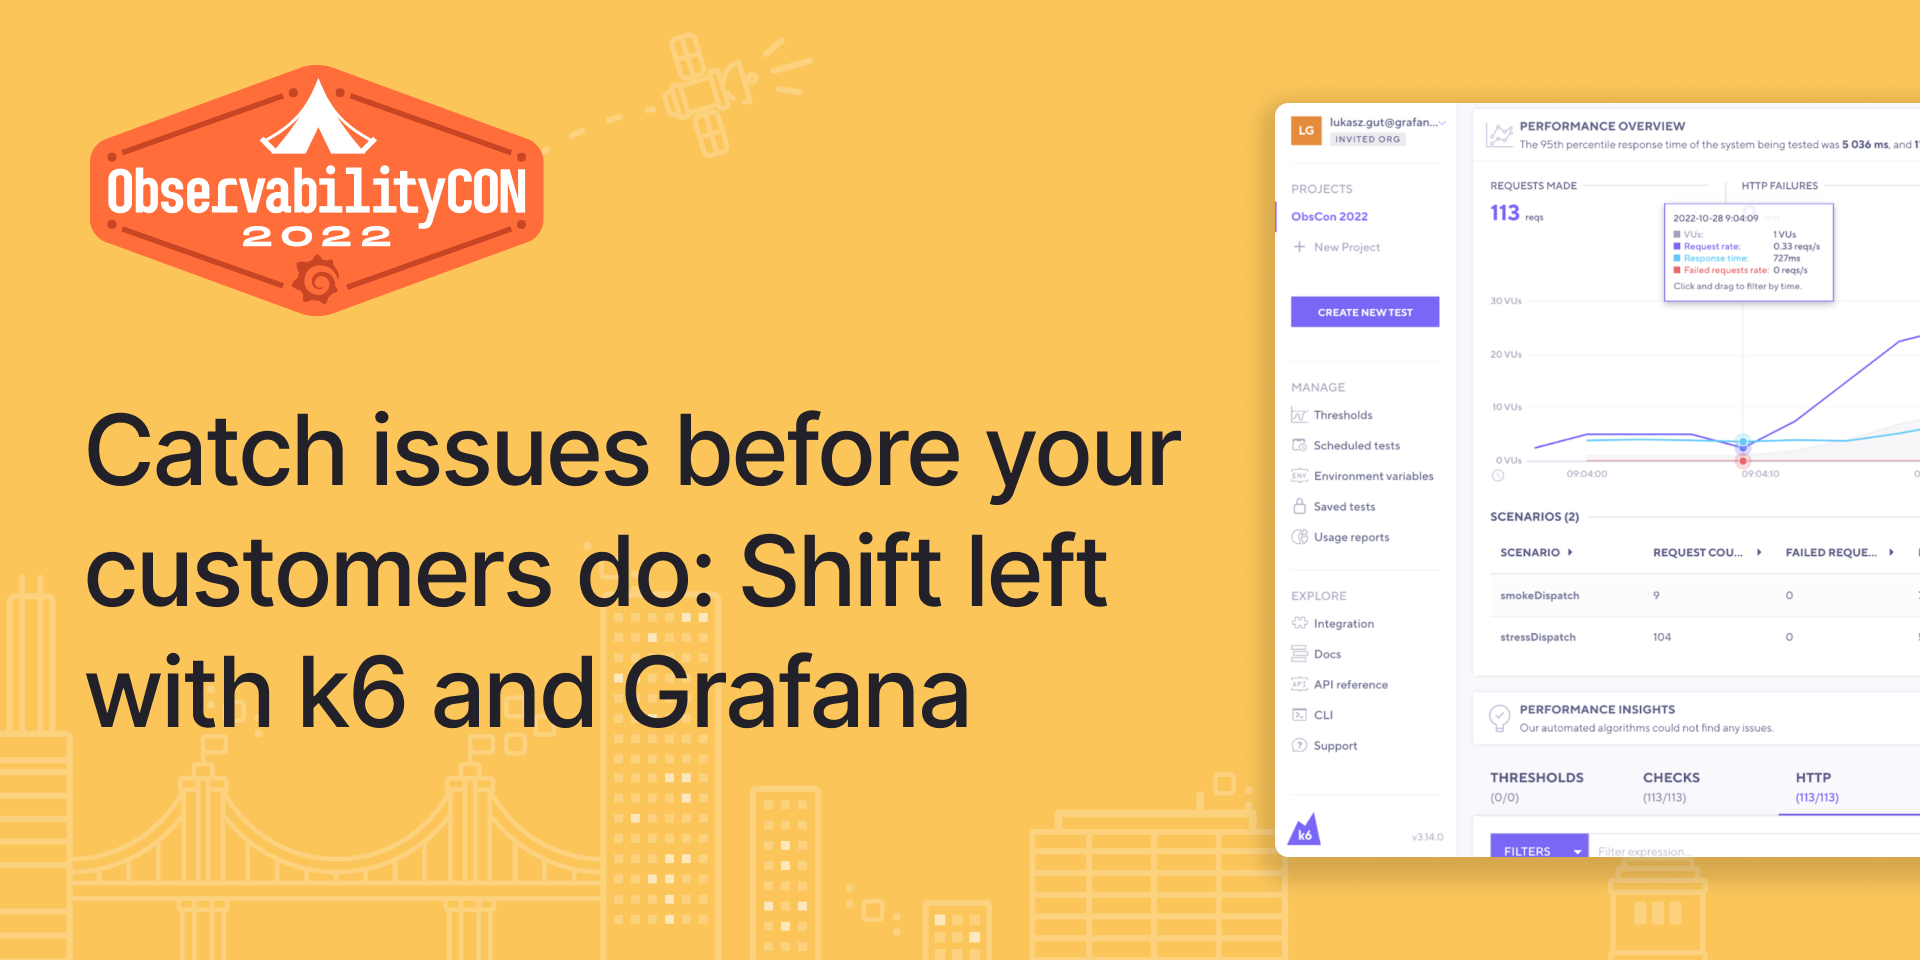 Catch issues before your customers do: Shift left with k6 and Grafana